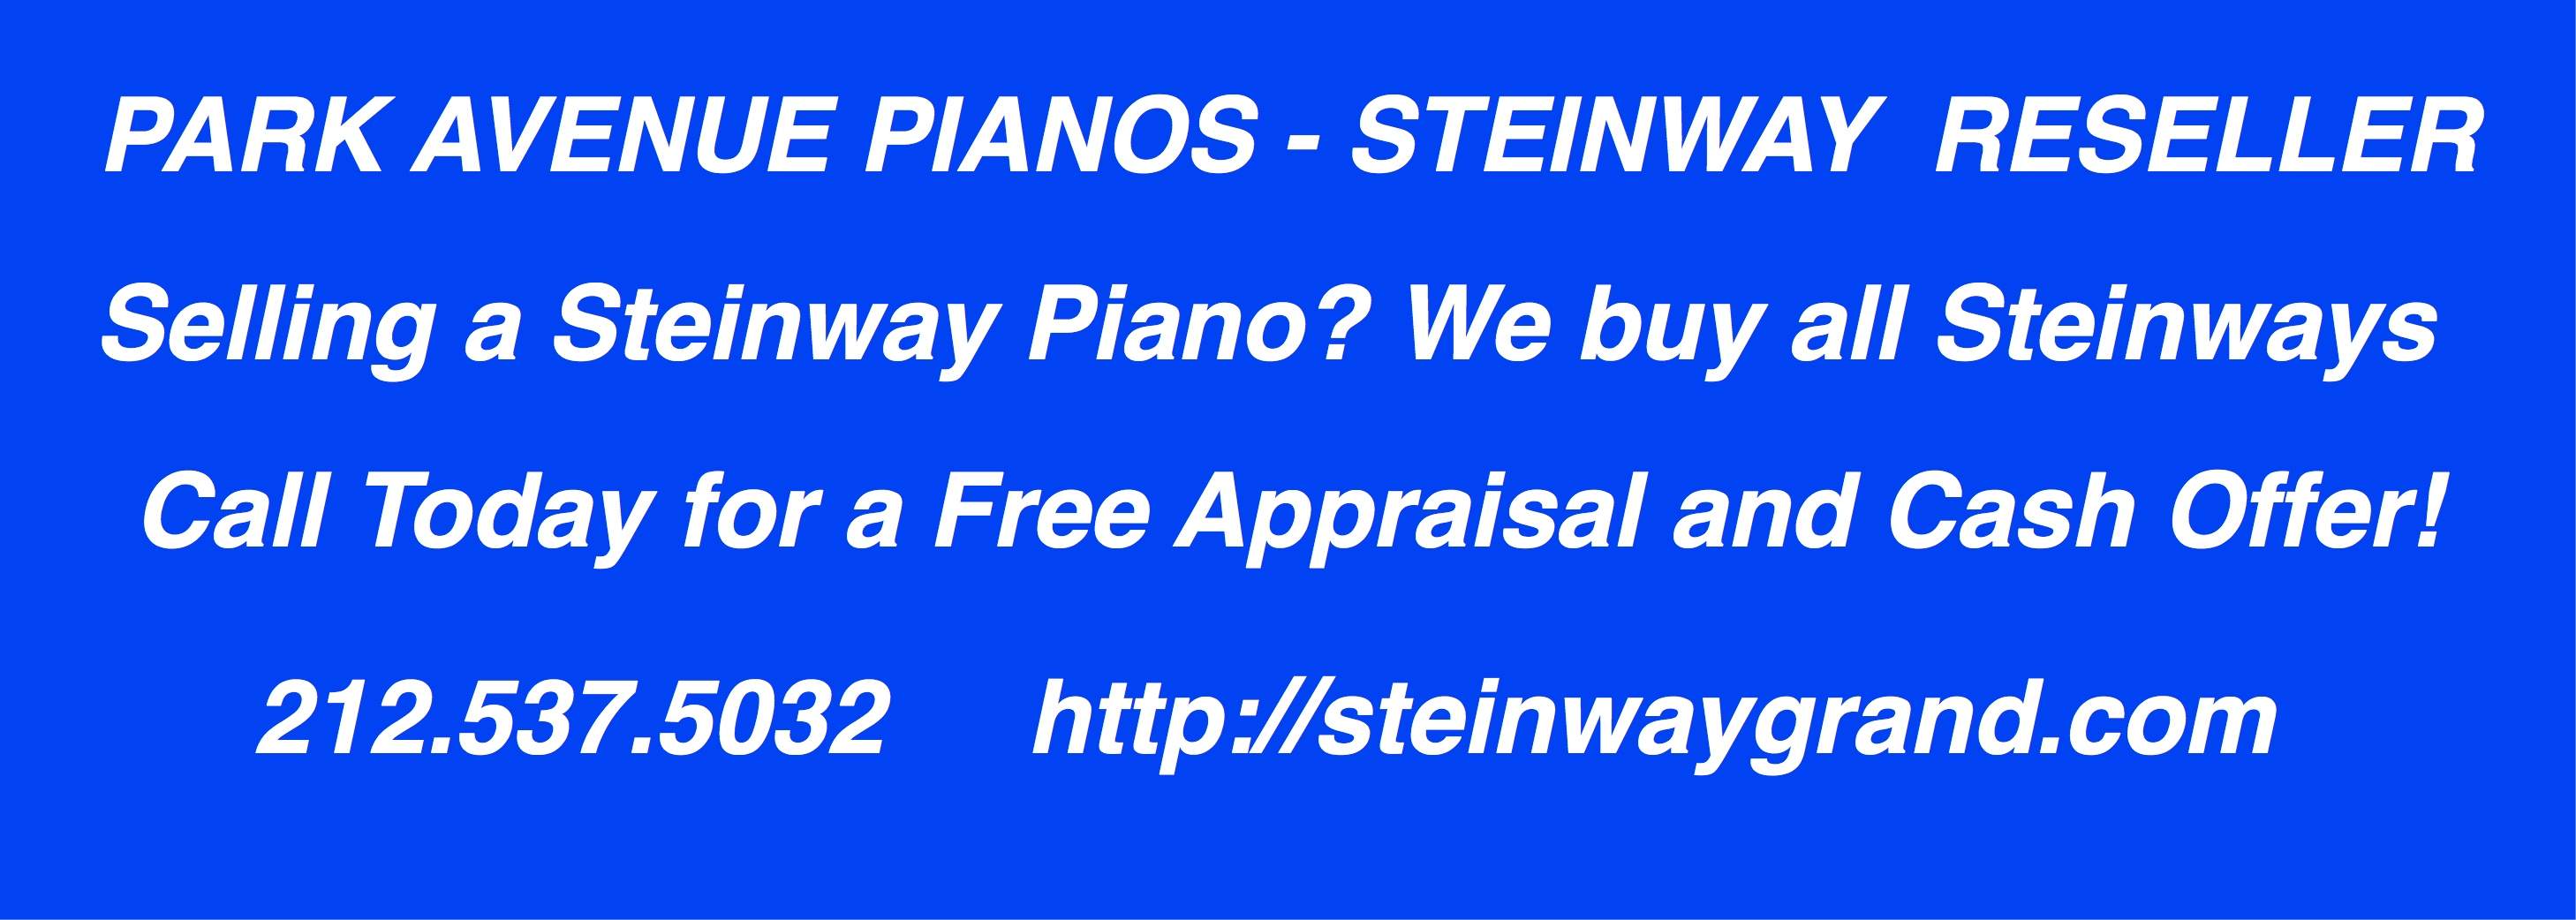 Sell a Piano | Buying & Selling Pianos Online Since 1997 | PianoMart